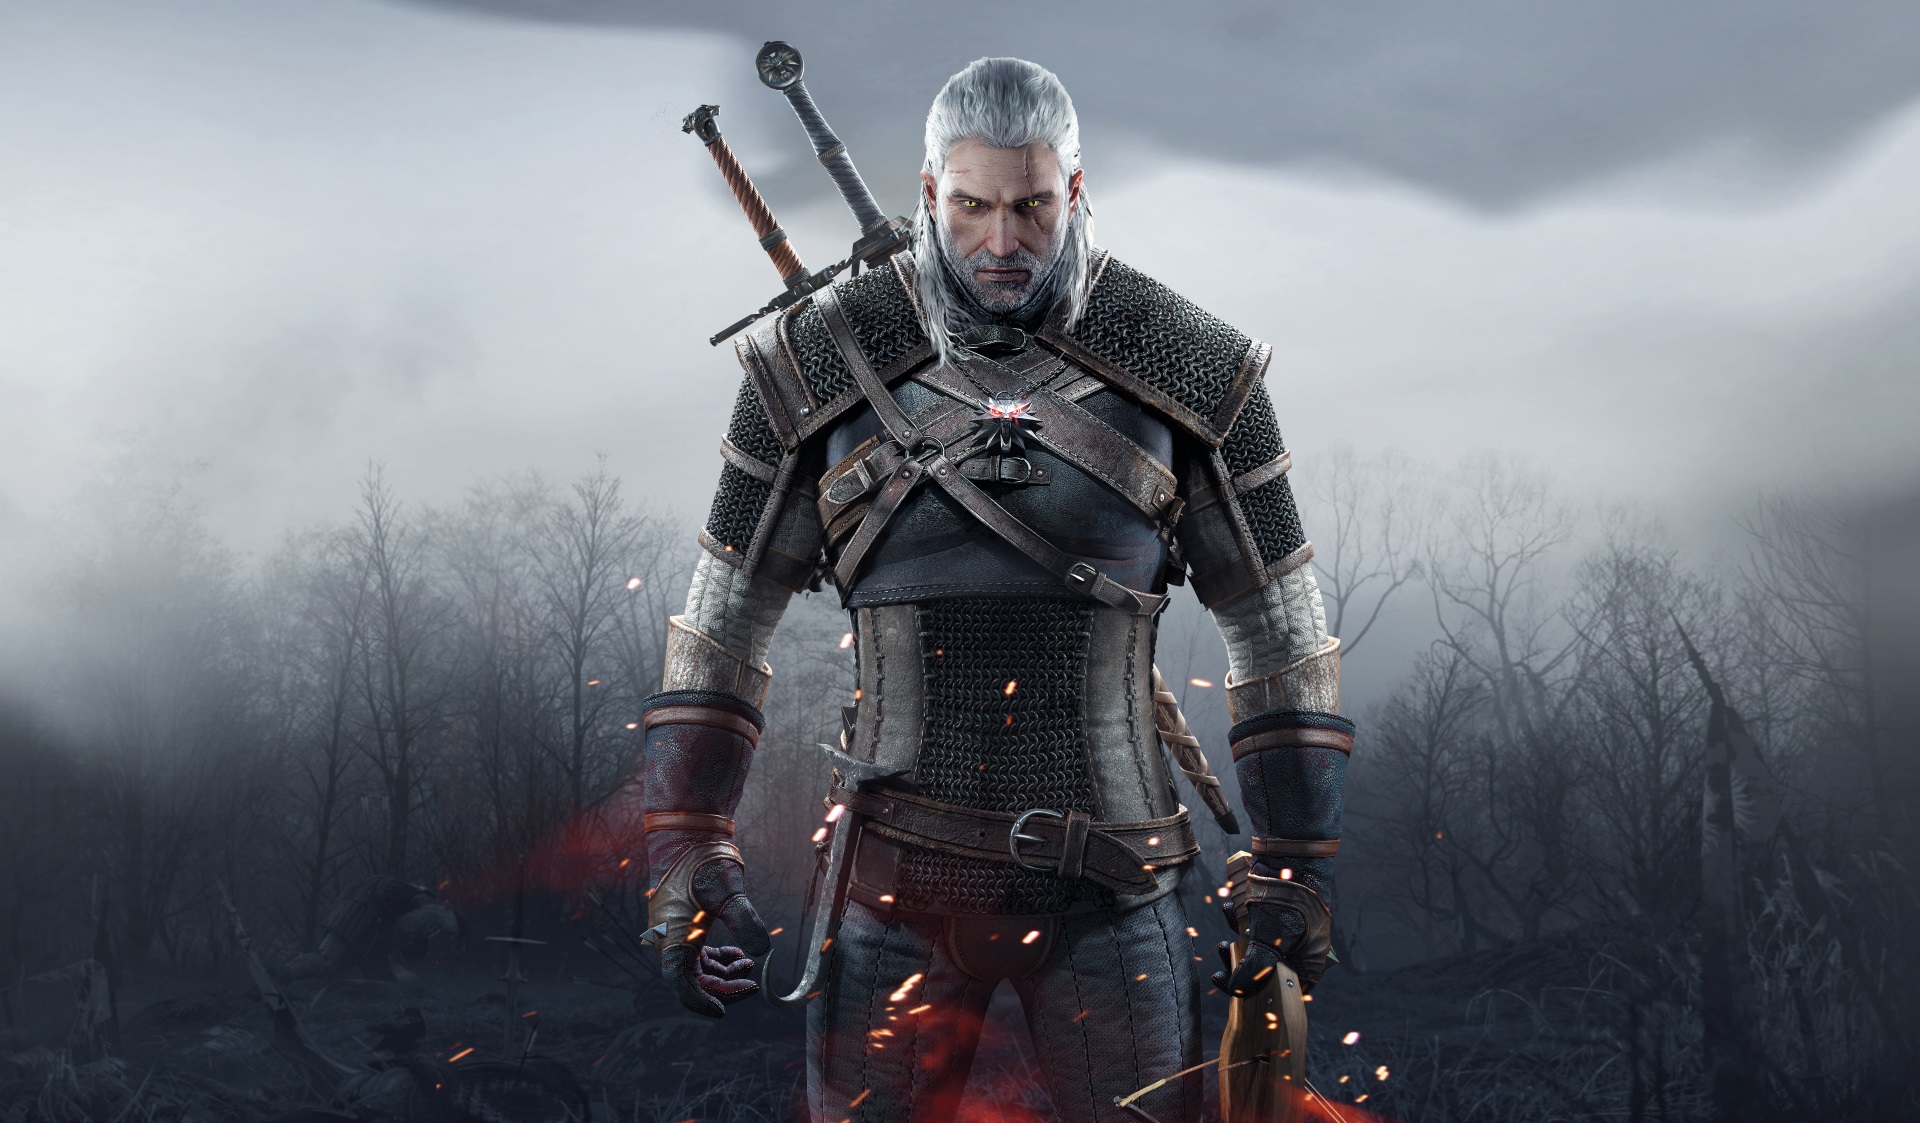 the witcher 3 wild hunt complete edition review